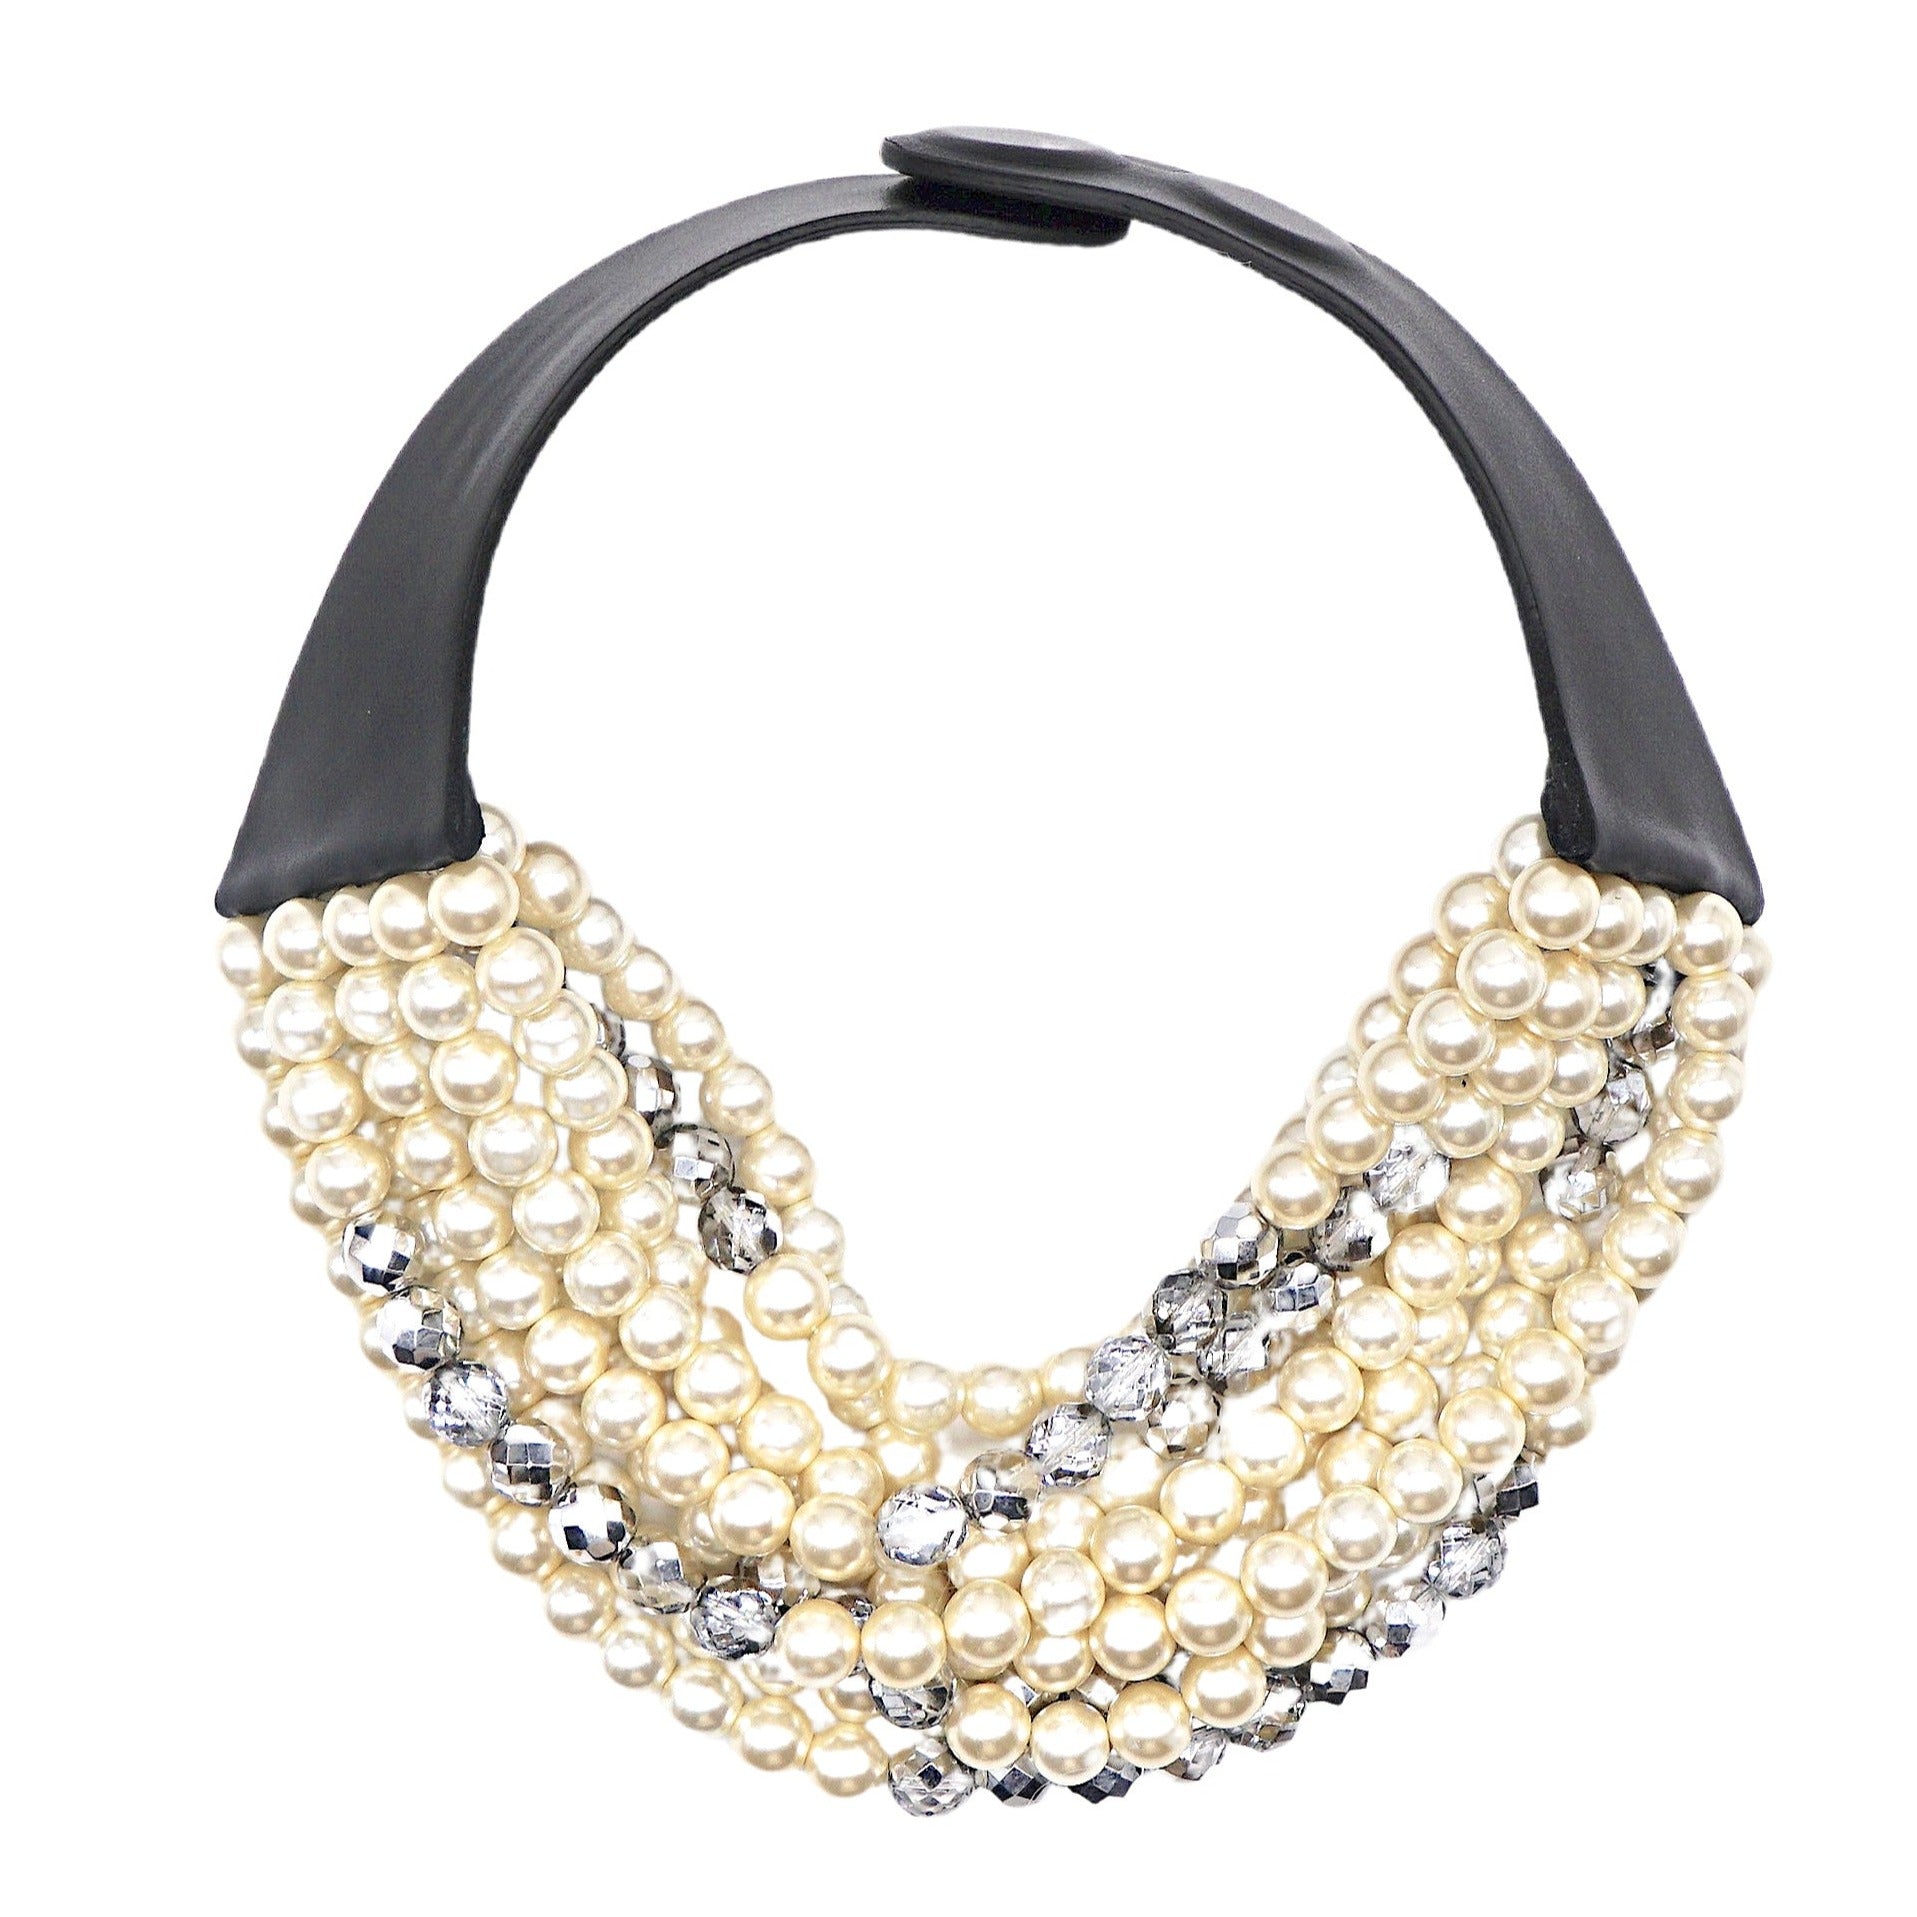 Pearl Silver Necklace